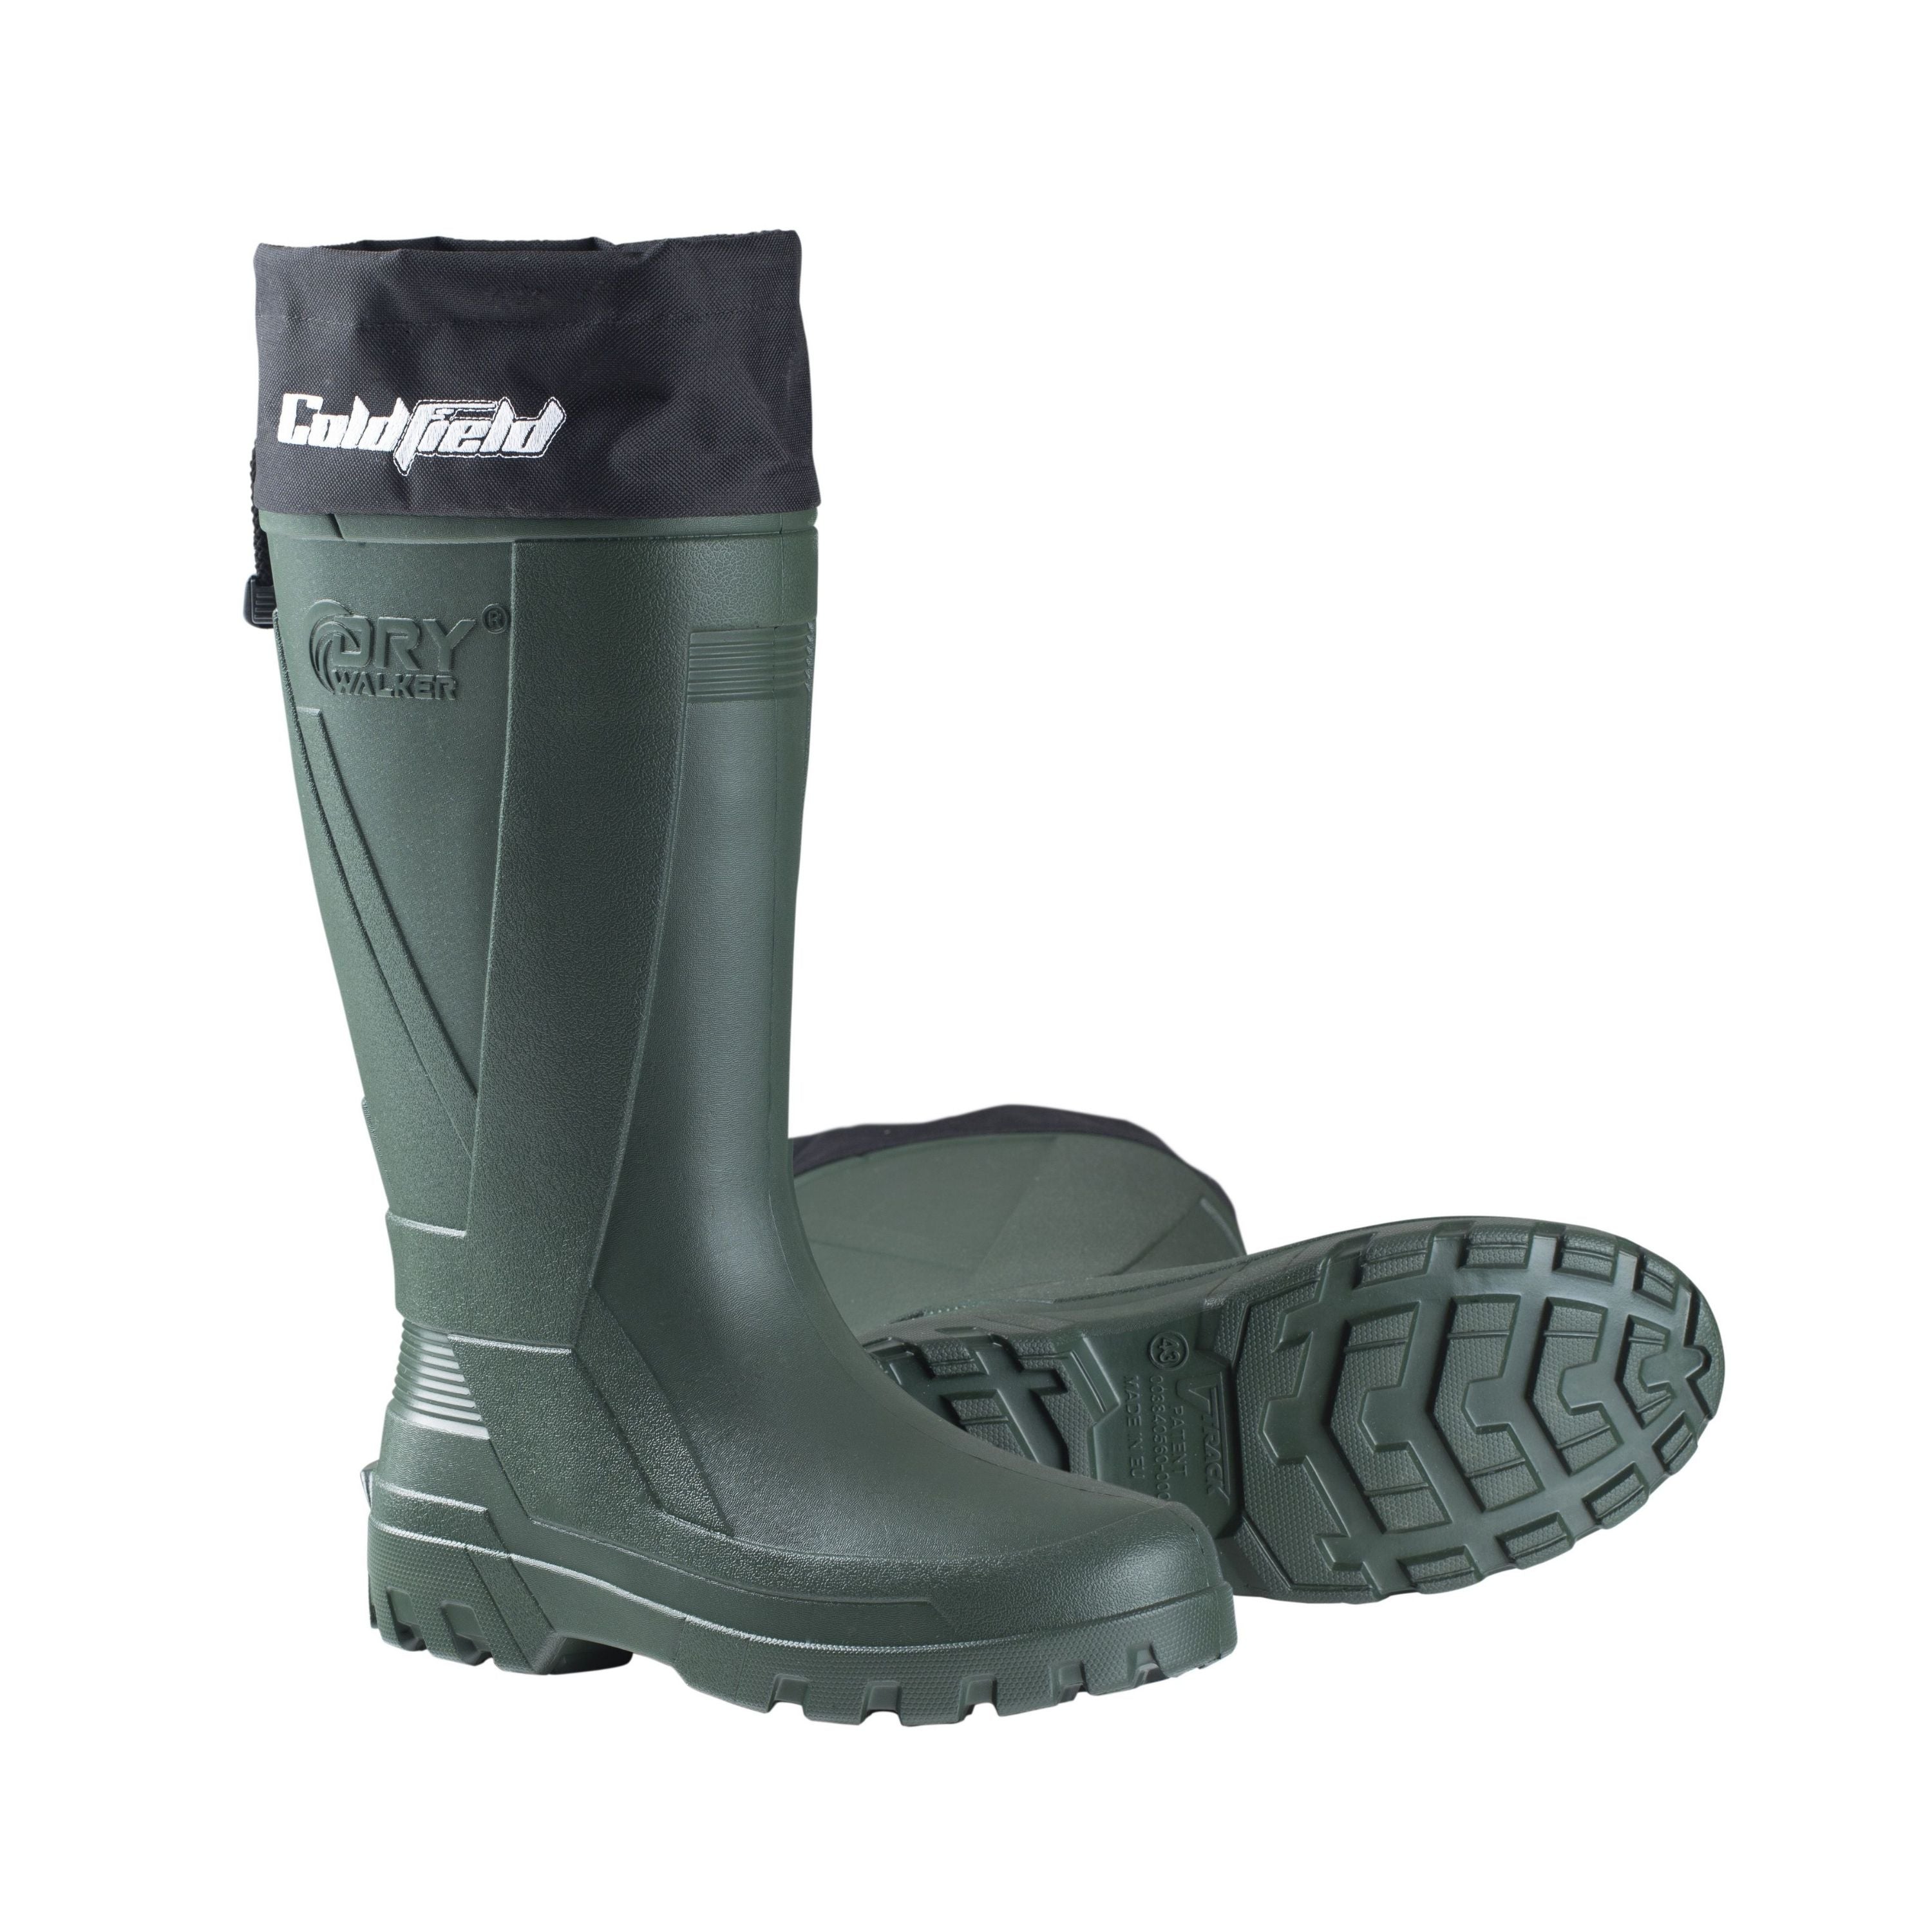 “V-Track" insulated boots - Men’s